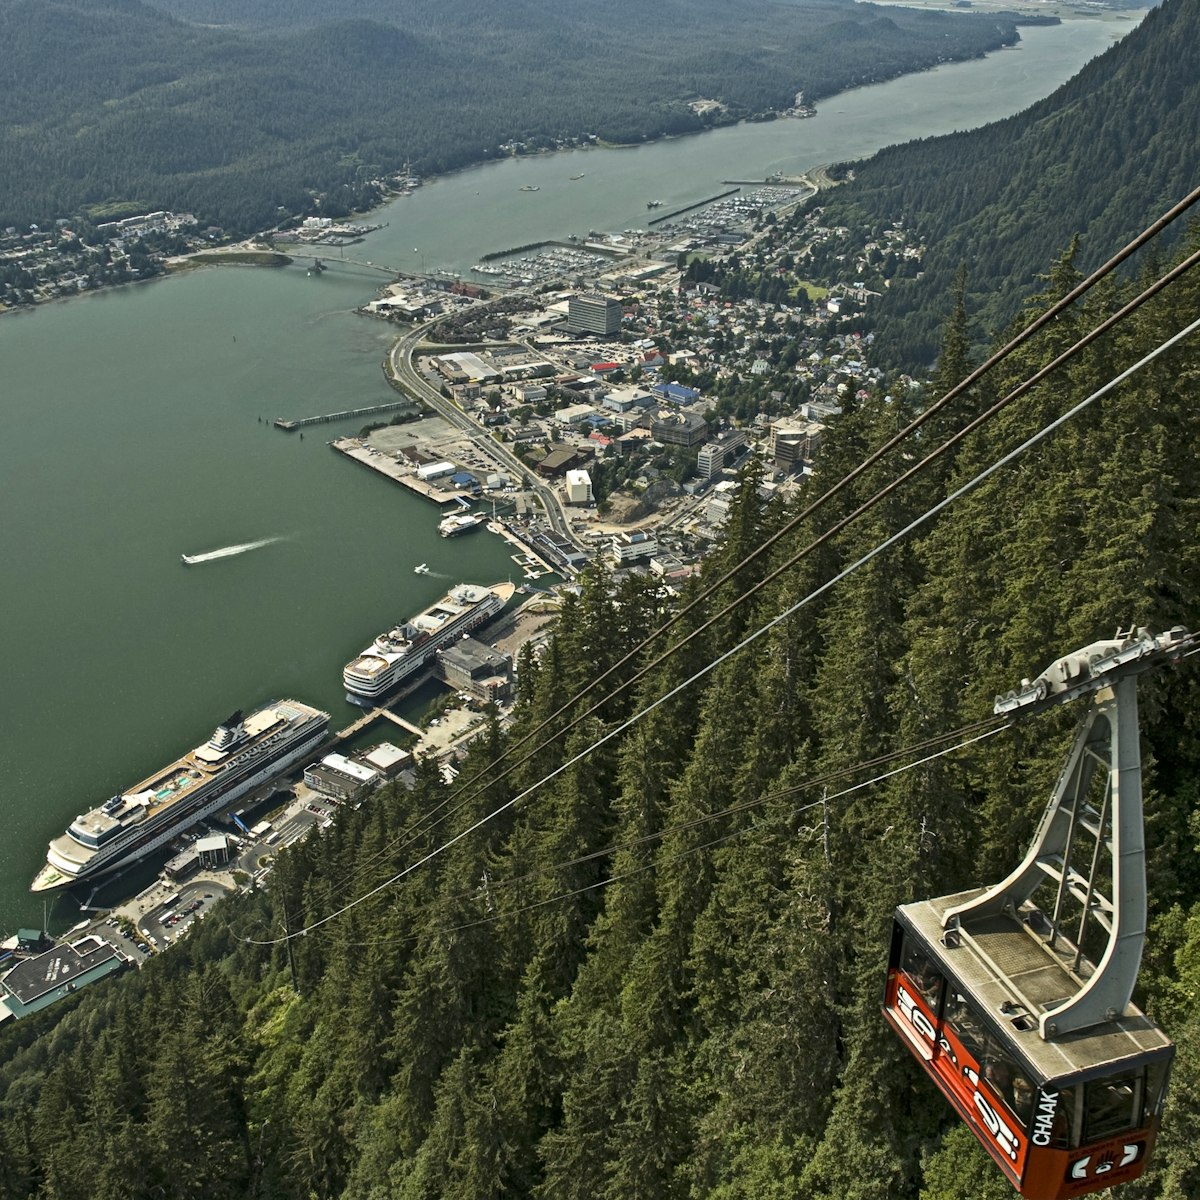 Juneau Alaska from Mt. Roberts with tramway.; Shutterstock ID 37133203; Your name (First / Last): Alexander Howard; GL account no.: 65050; Netsuite department name: Online Editorial; Full Product or Project name including edition: Destination Next Pages